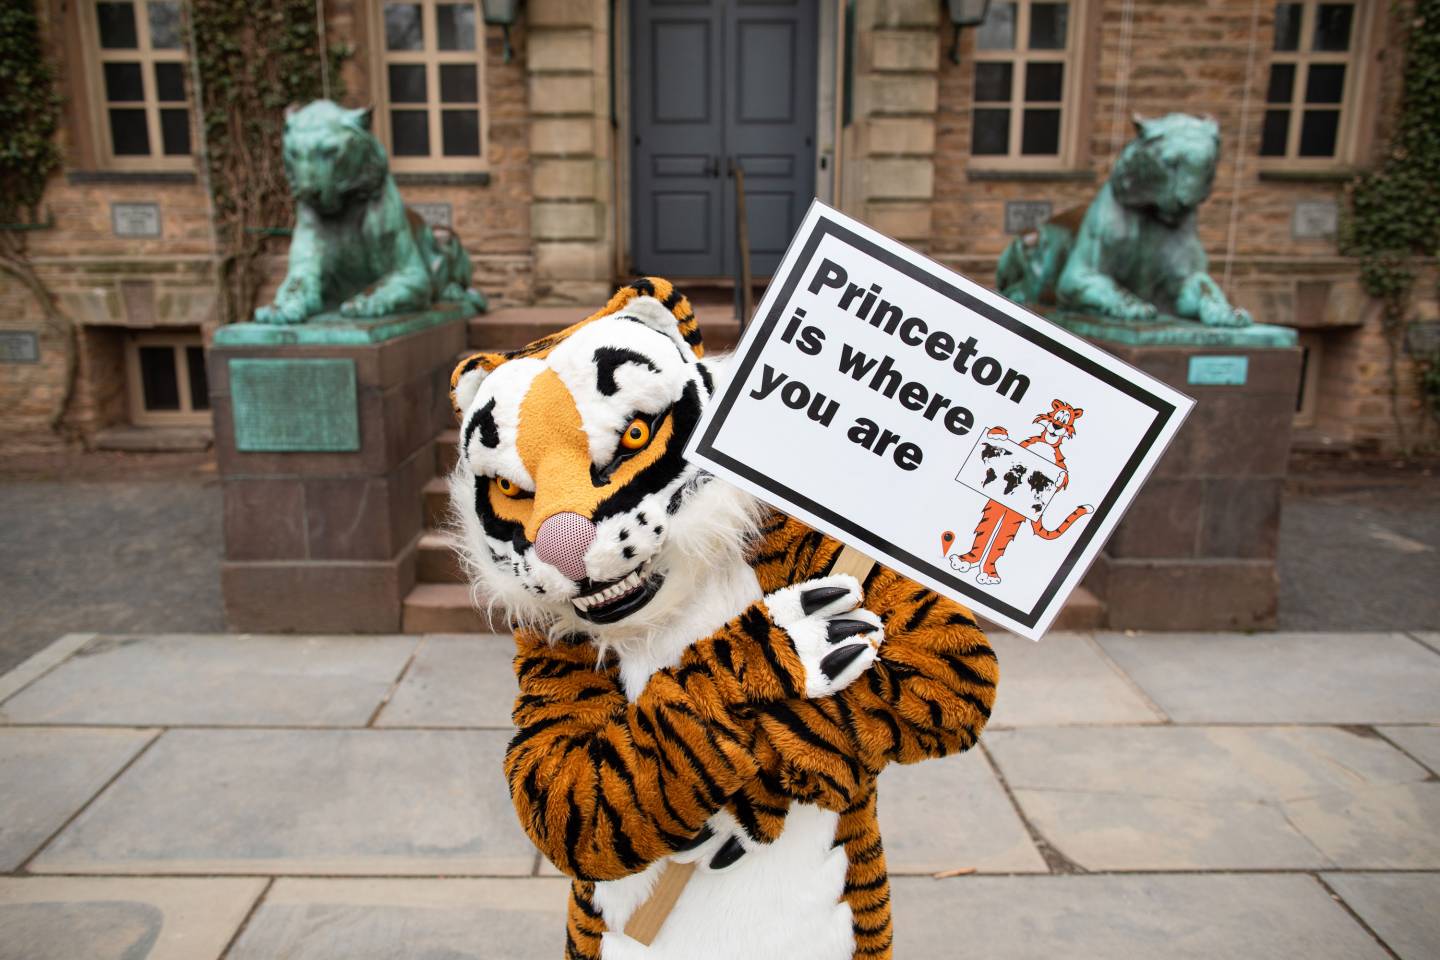 Reunions Online Princeton is where you are